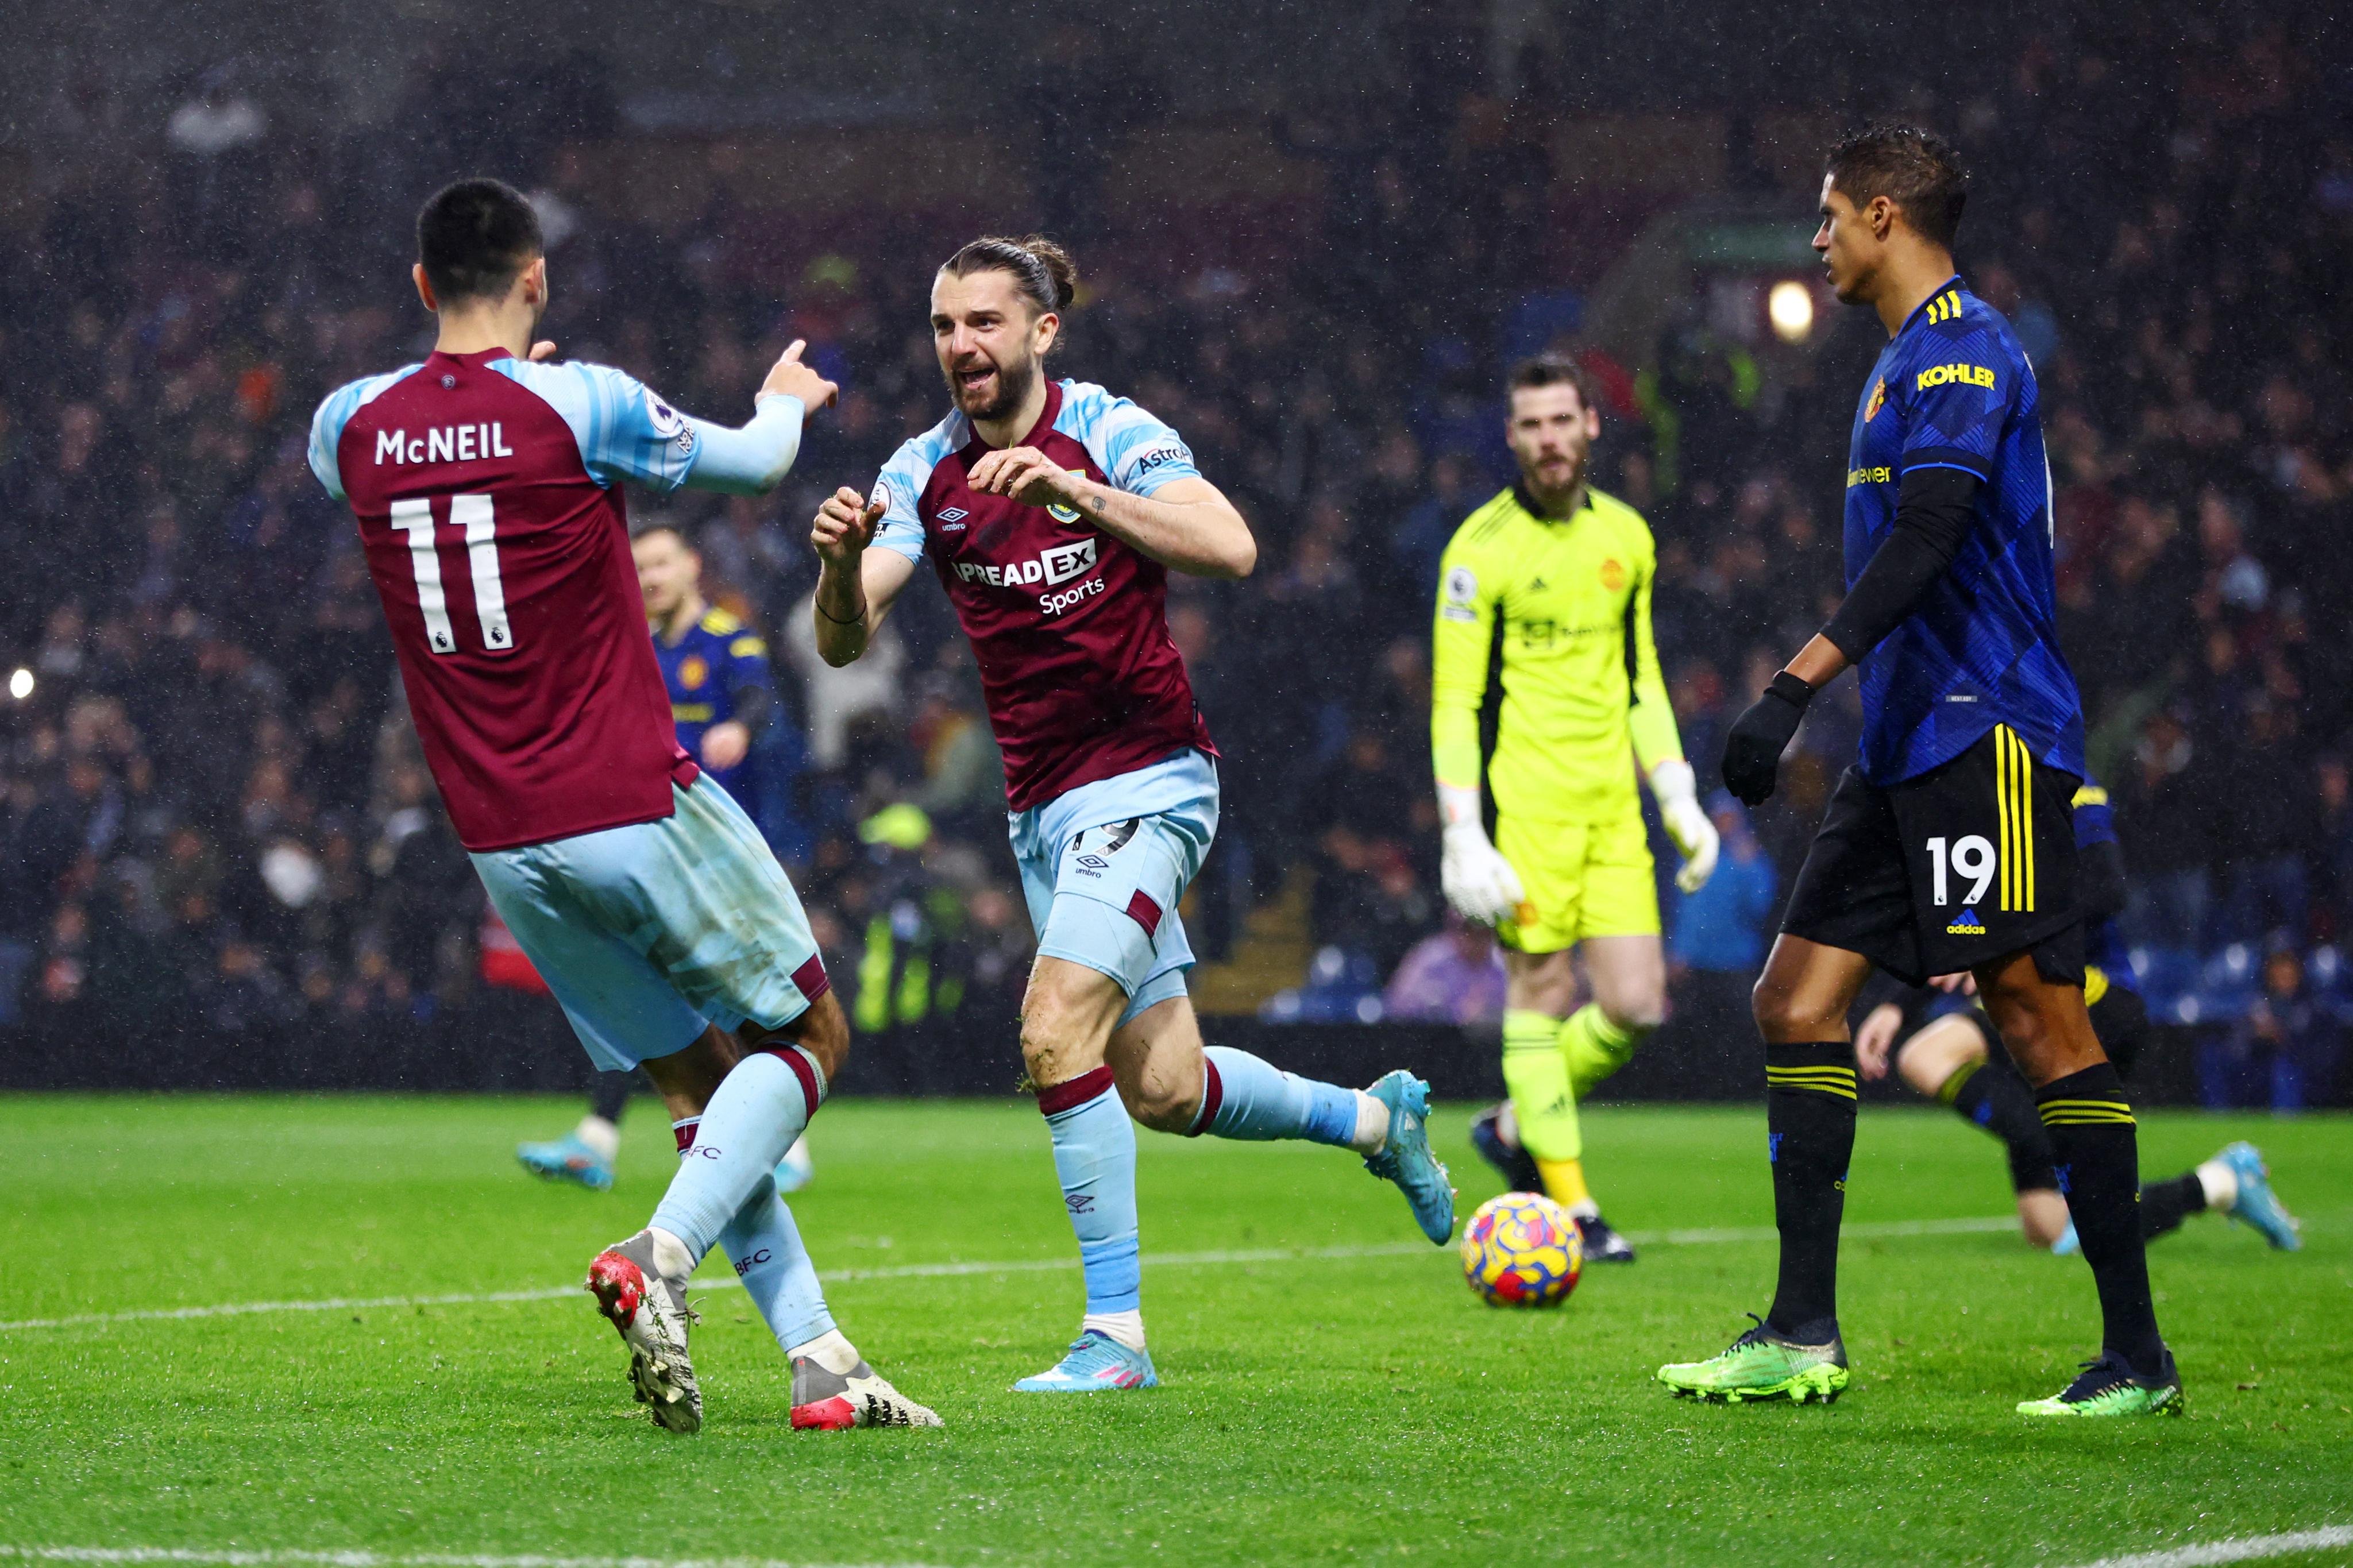 Draw against Burnley was a bad result for Manchester United, reveals Paul Merson